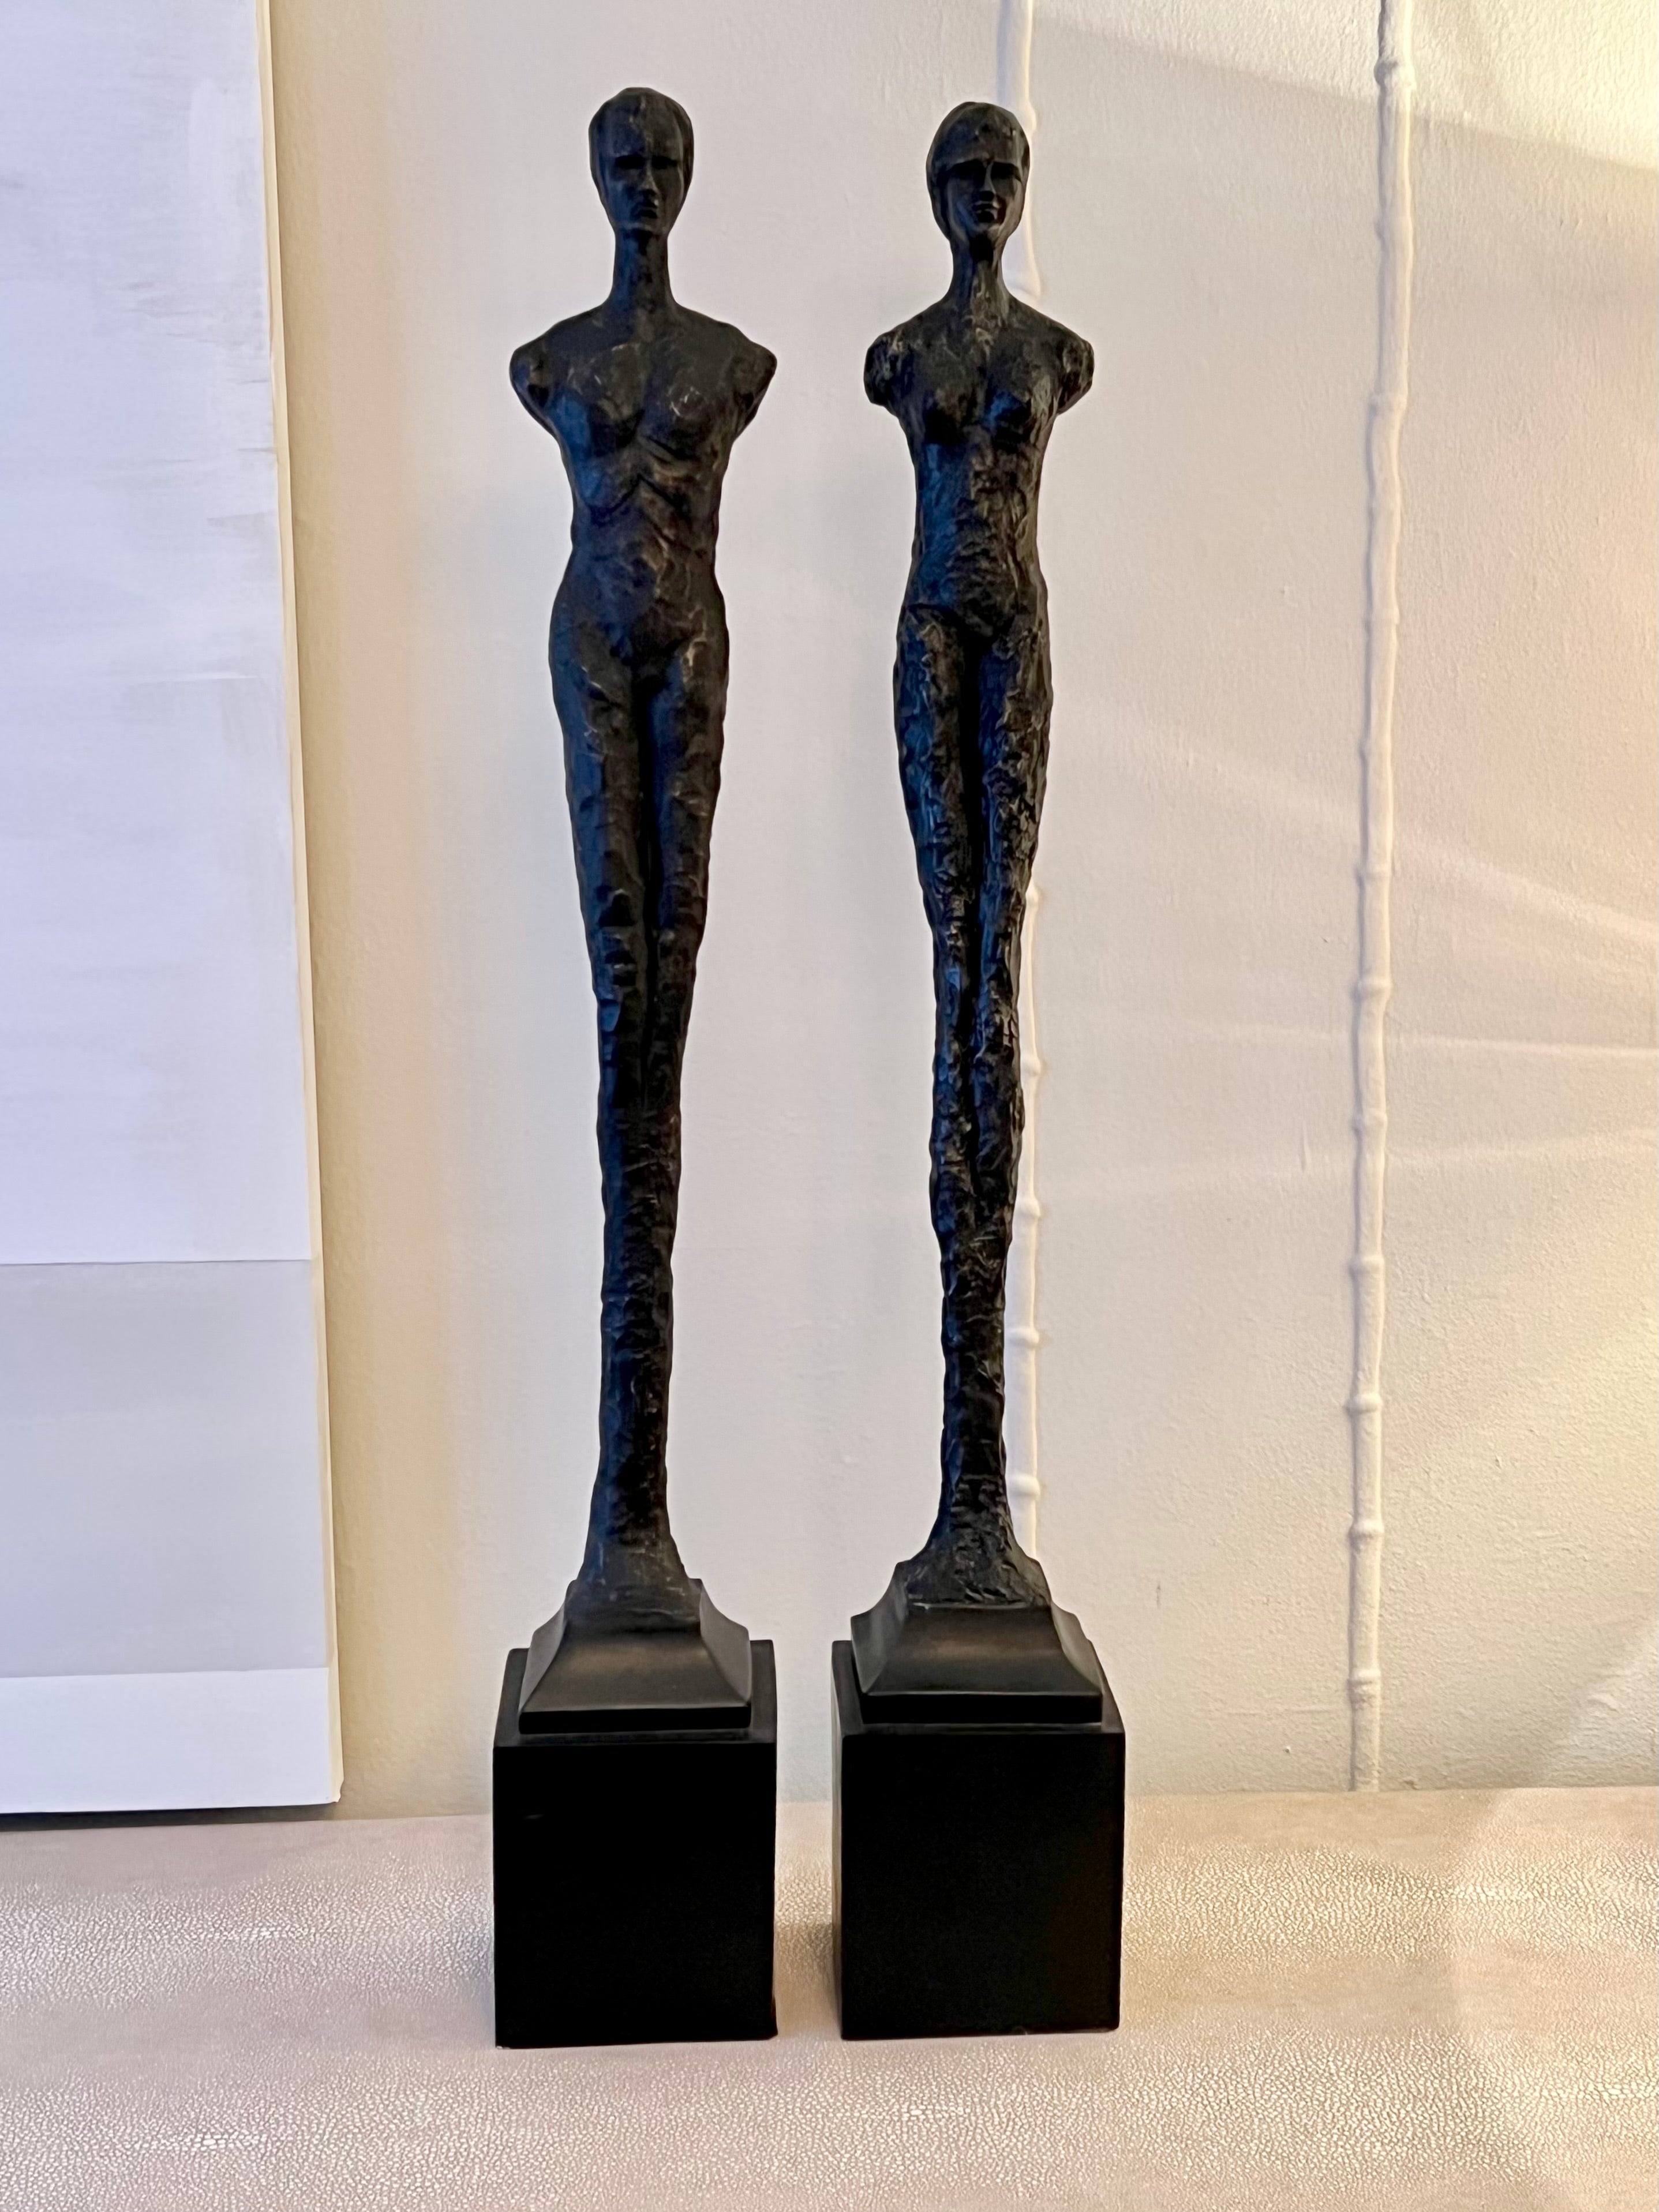 Two slender nude Resin figurative statues on wooden bases. In the style of Giacometti - these delicate figure have a pinched-clay look. They stand nearly 3' tall, impressive and thoughtful in many rooms. A compliment to many interiors and settings -